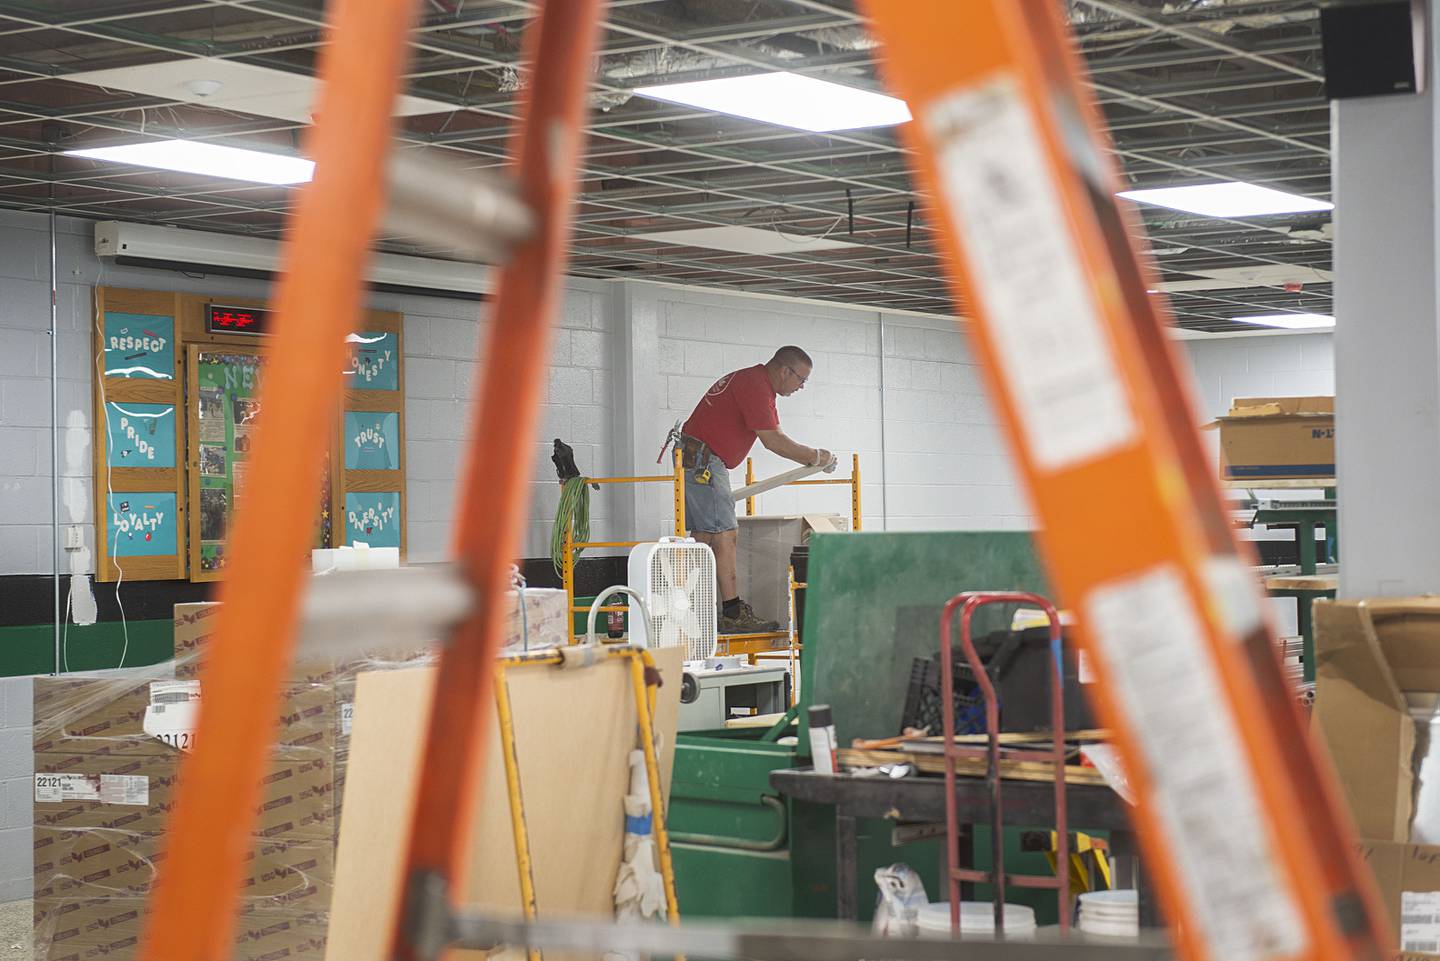 Joel Plum of Gehrke Construction works on the ceiling tiles Wednesday, July 27, 2022 in Rock Falls High School’s renovated cafeteria. The kitchen and dining area has undergone extensive updating.